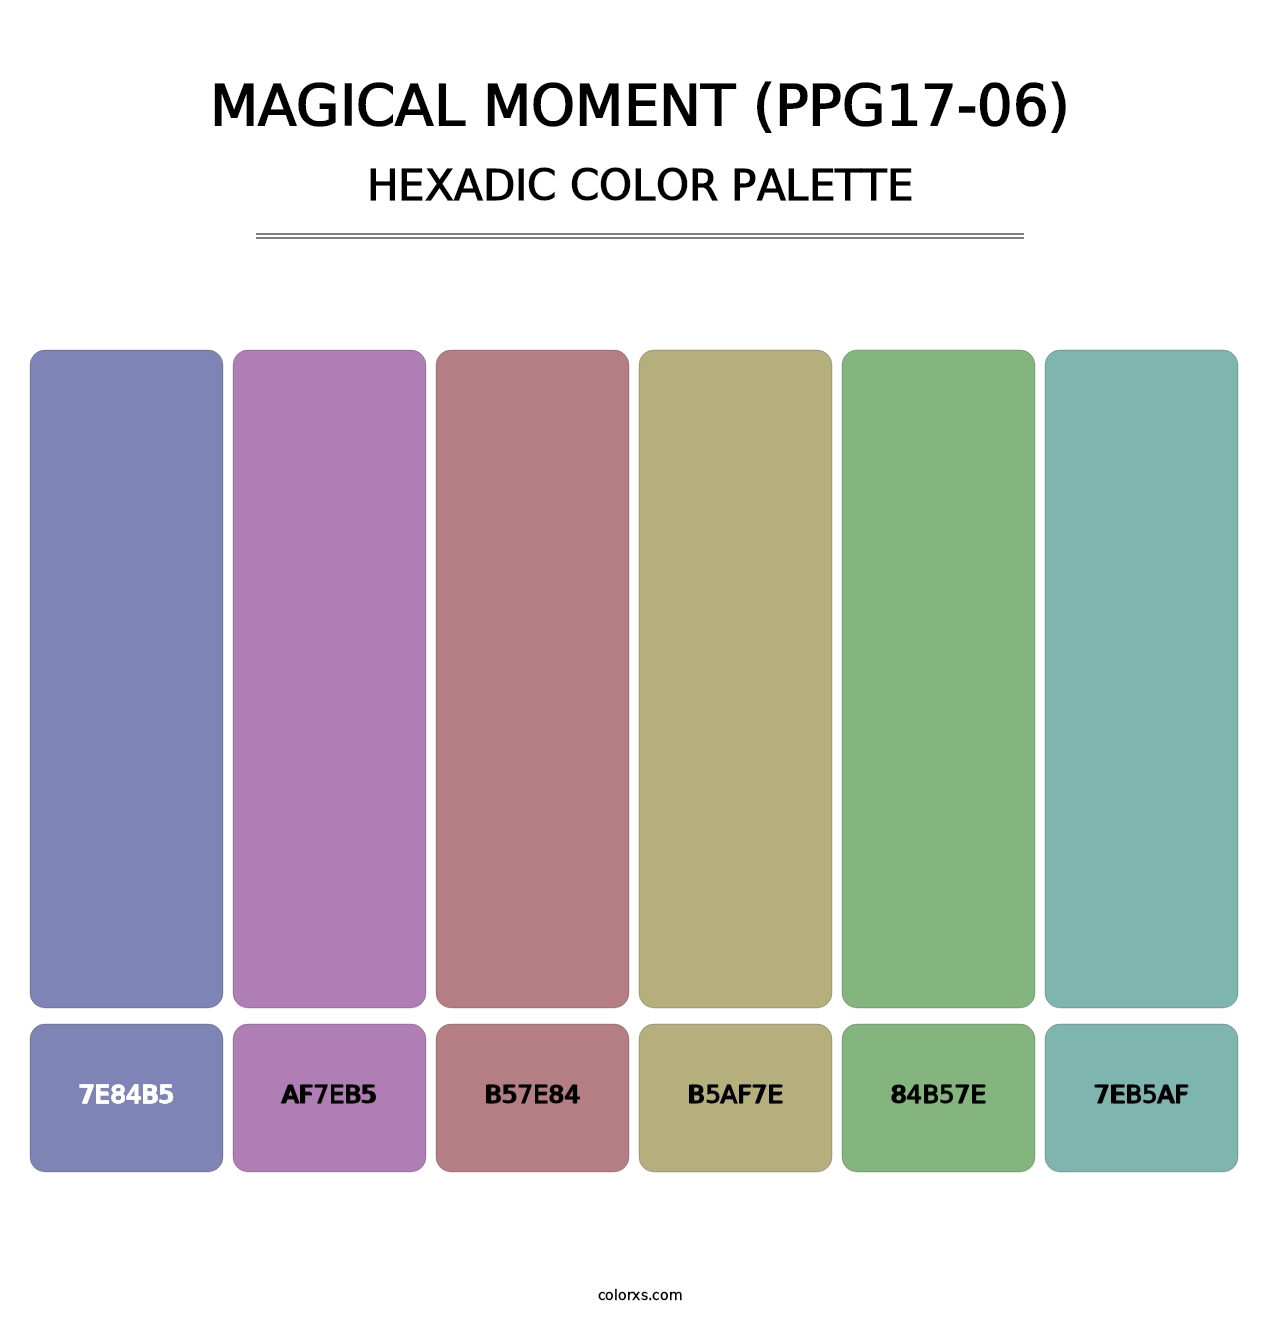 Magical Moment (PPG17-06) - Hexadic Color Palette